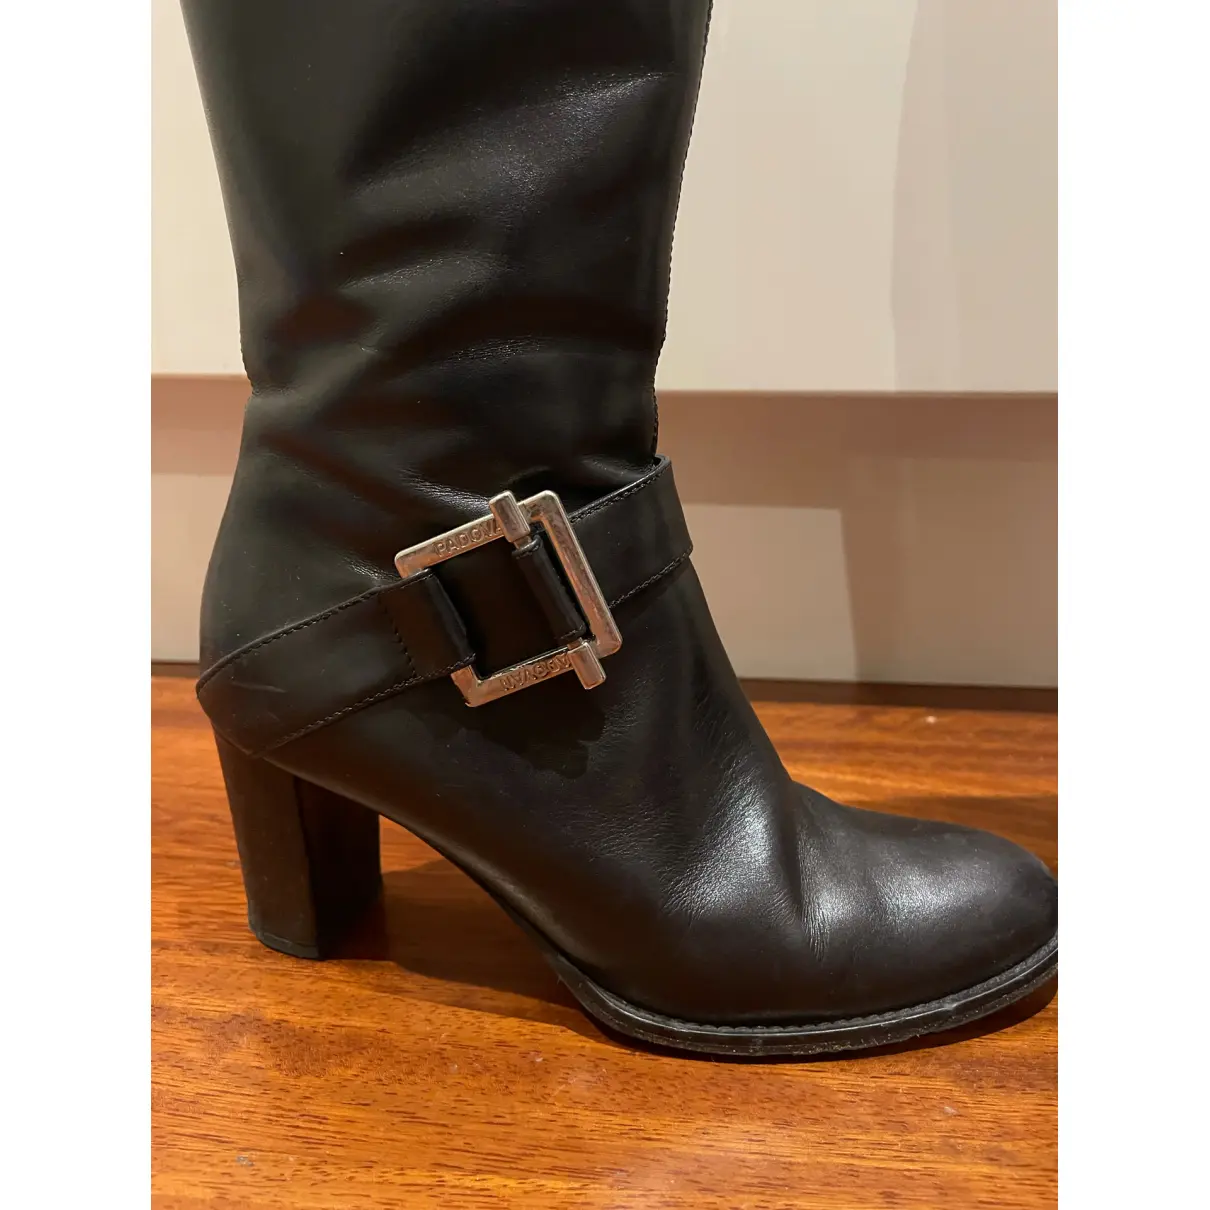 Luxury Luciano Padovan Ankle boots Women